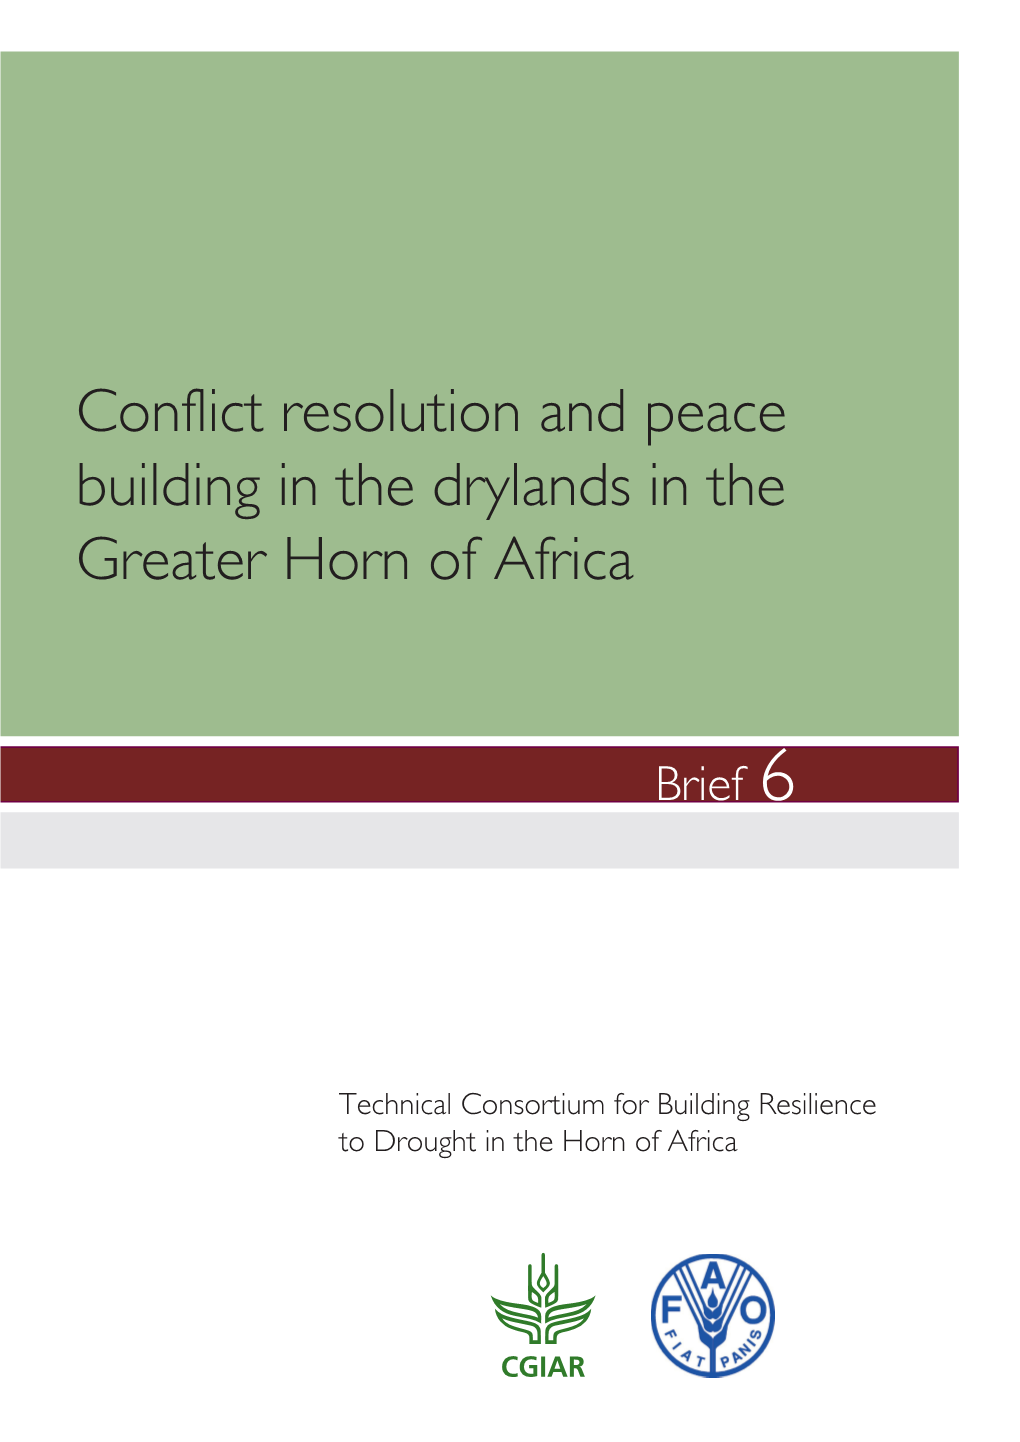 Conflict Resolution and Peace Building in the Drylands in the Greater Horn of Africa